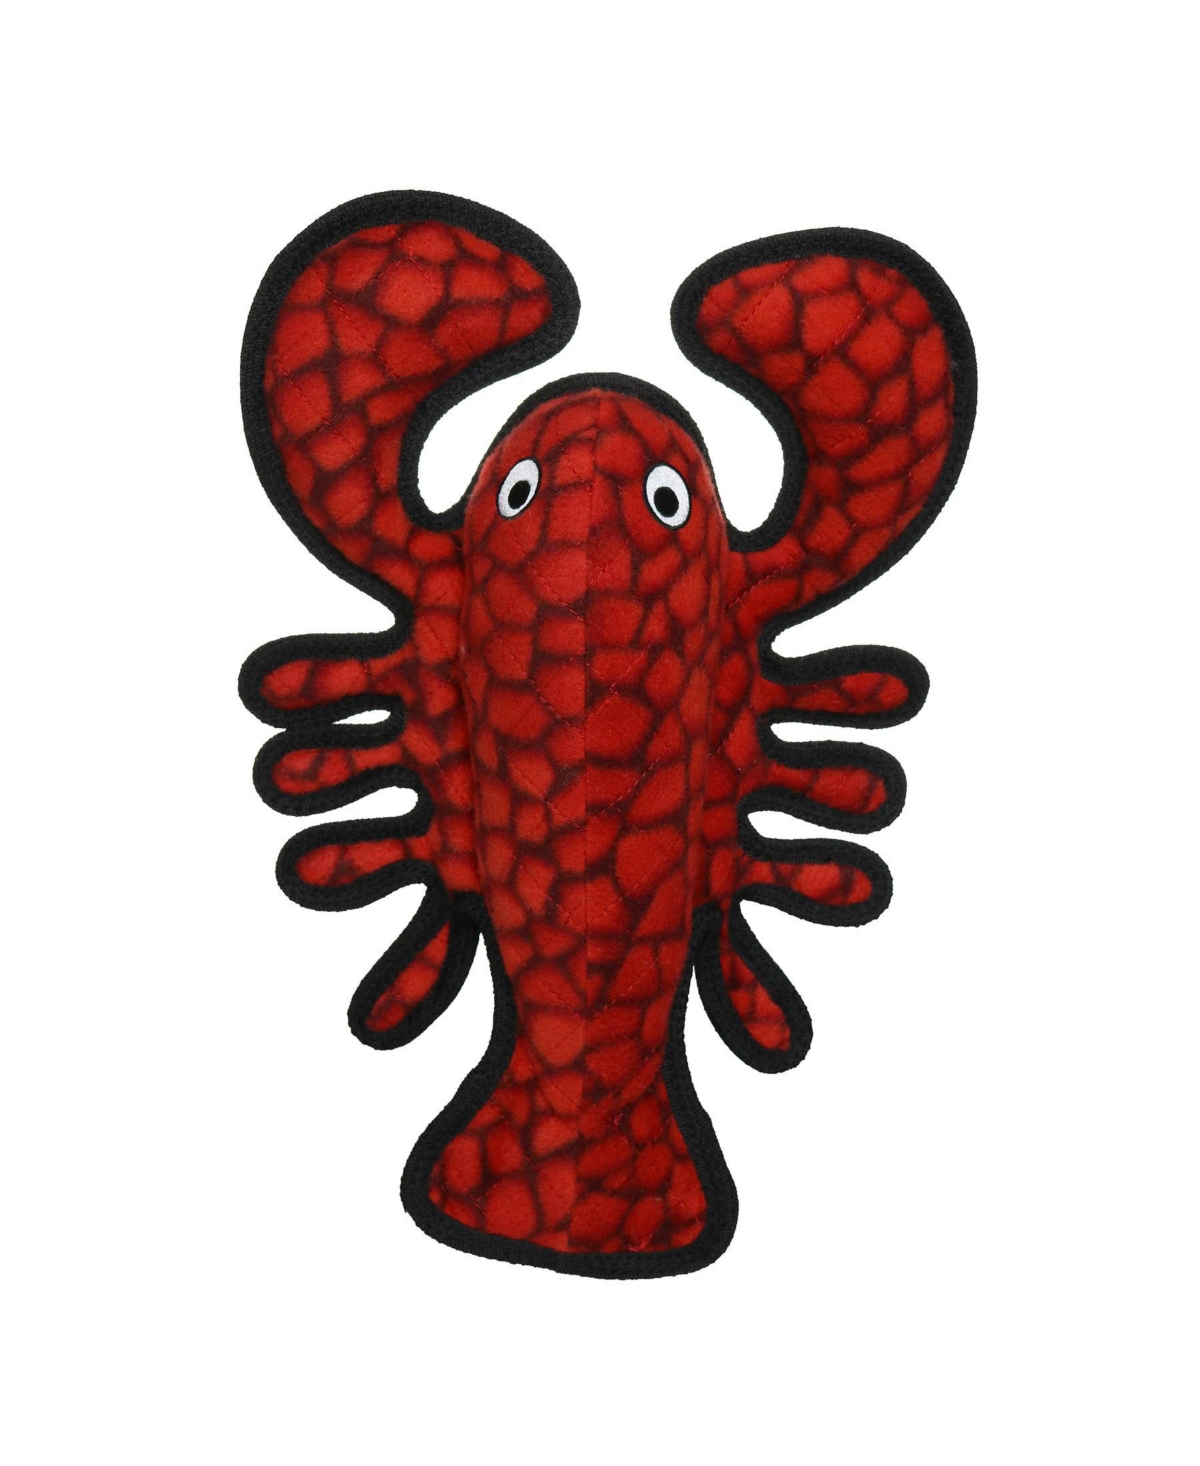 Ocean Creature Lobster, Dog Toy - Red